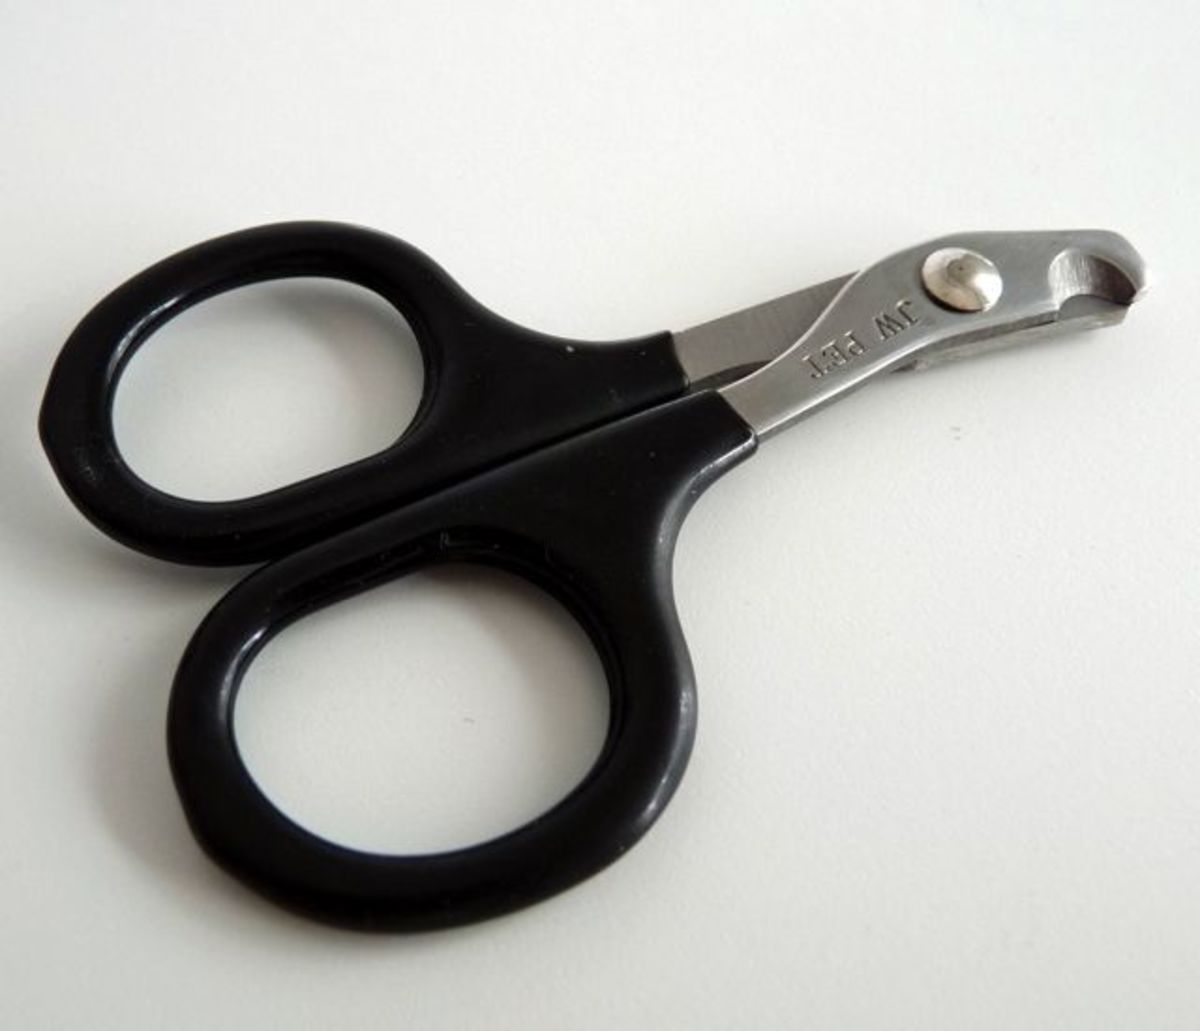 This is one type of scissor designed for cats.